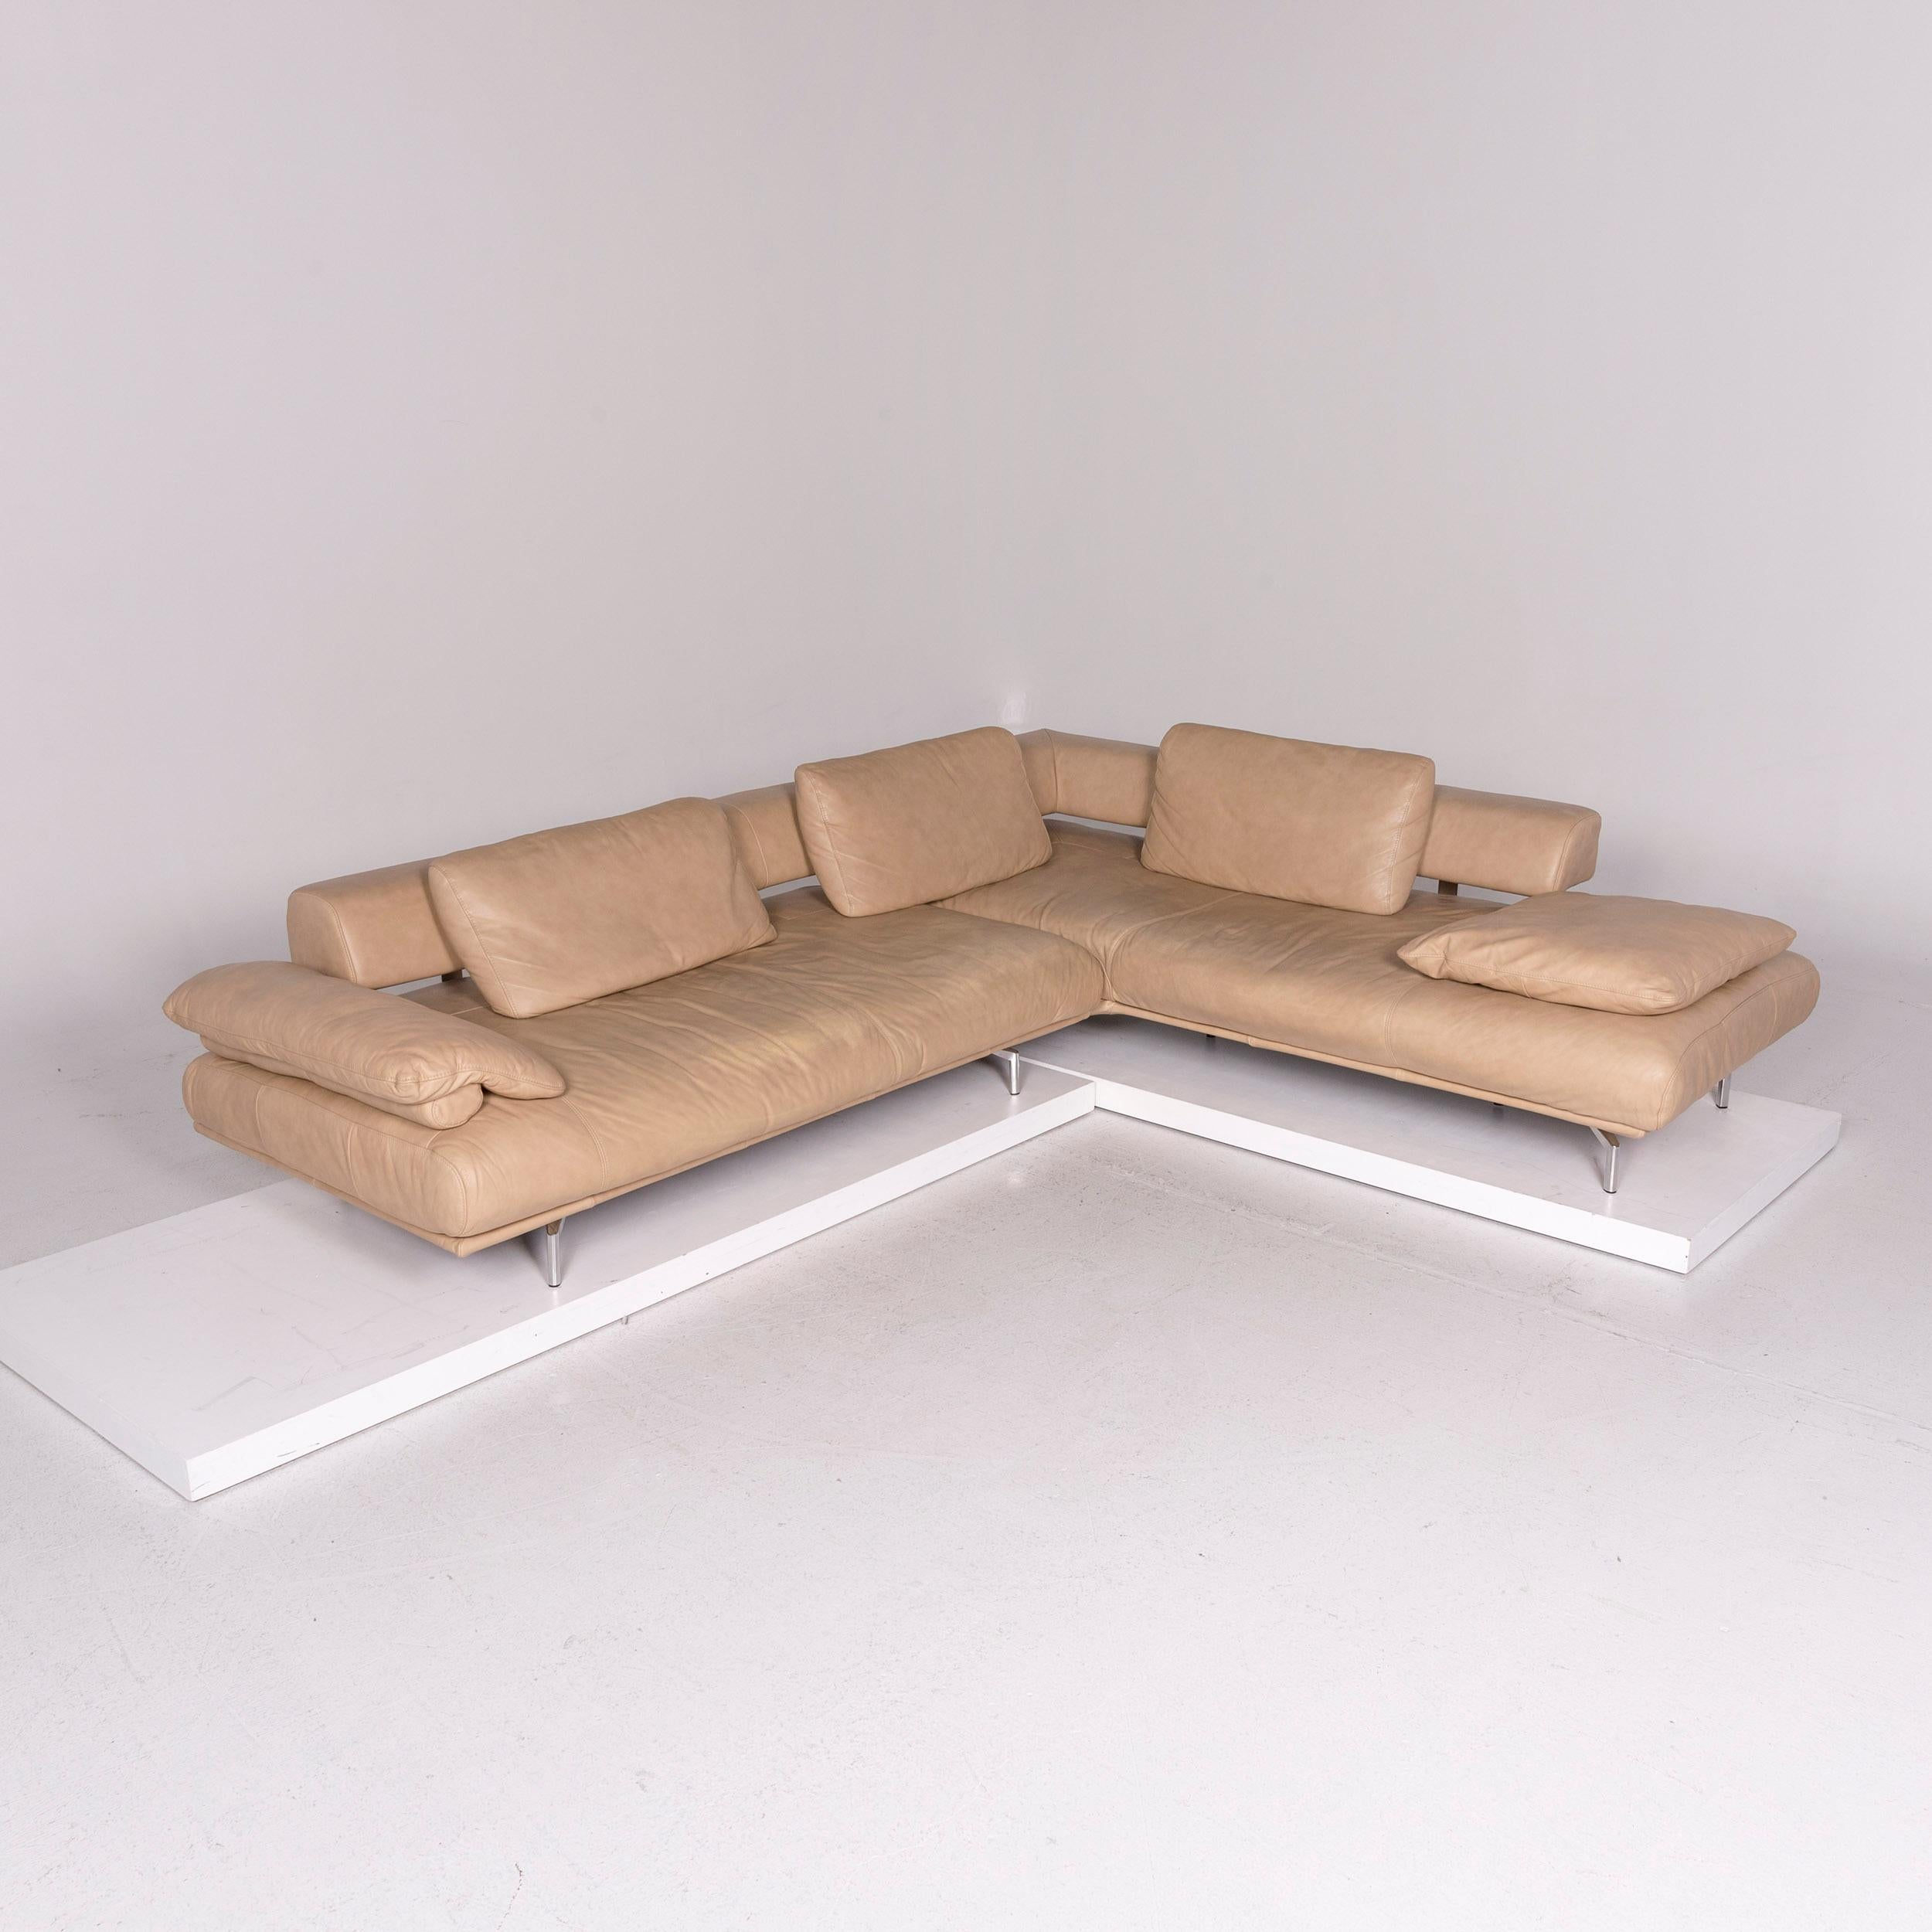 We bring to you a Dieter Knoll Collection Maranello leather corner sofa beige sofa.
 
 

 Product measurements in centimeters:
 

 Depth 115
Width 310
Height 70
Seat-height 42
Rest-height 70
Seat-depth 85
Seat-width 248
Back-height 28.